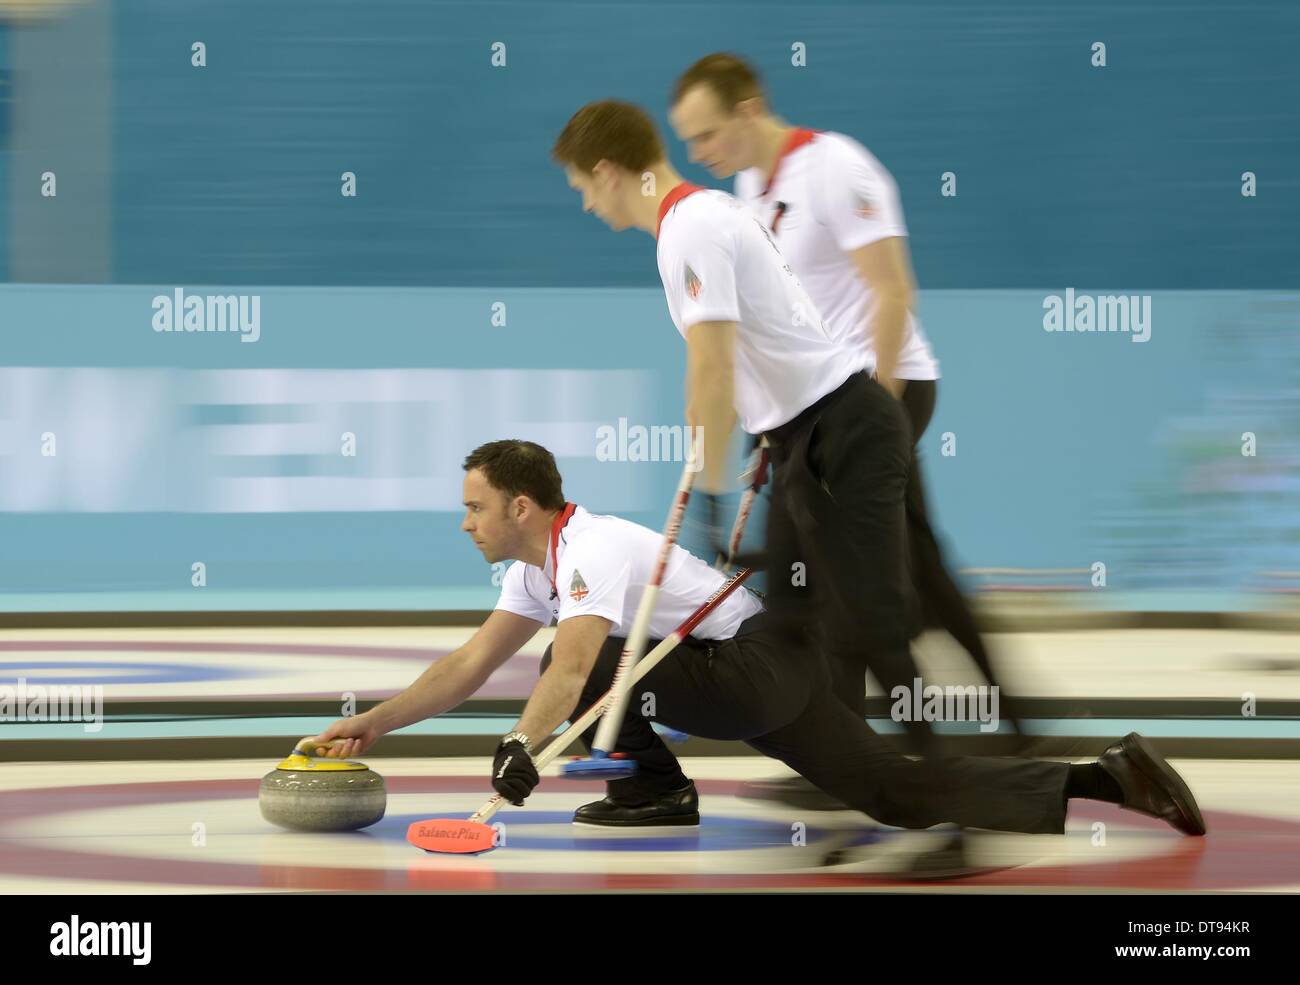 David Murdoch (GBR, skip) pushes off with Michael Goodfellow (GBR, right) and Scott Andrews (GBR). Mens curling - Ice Cube Curling Centre - Olympic Park - Sochi - Russia - 12/02/2014 Stock Photo